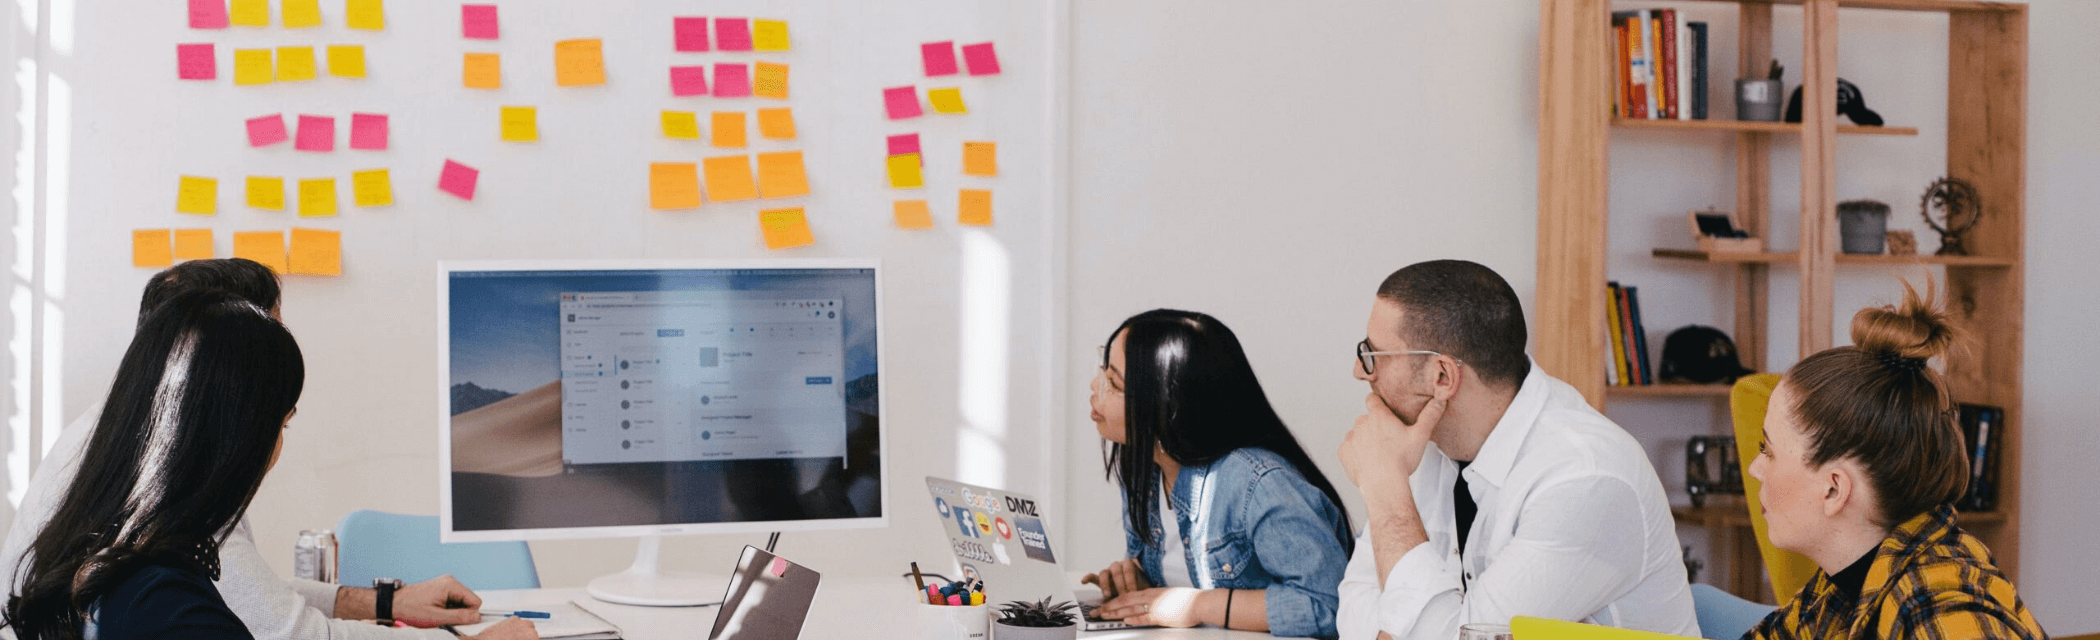 How 7 leading organizations use Productboard to become more customer-driven